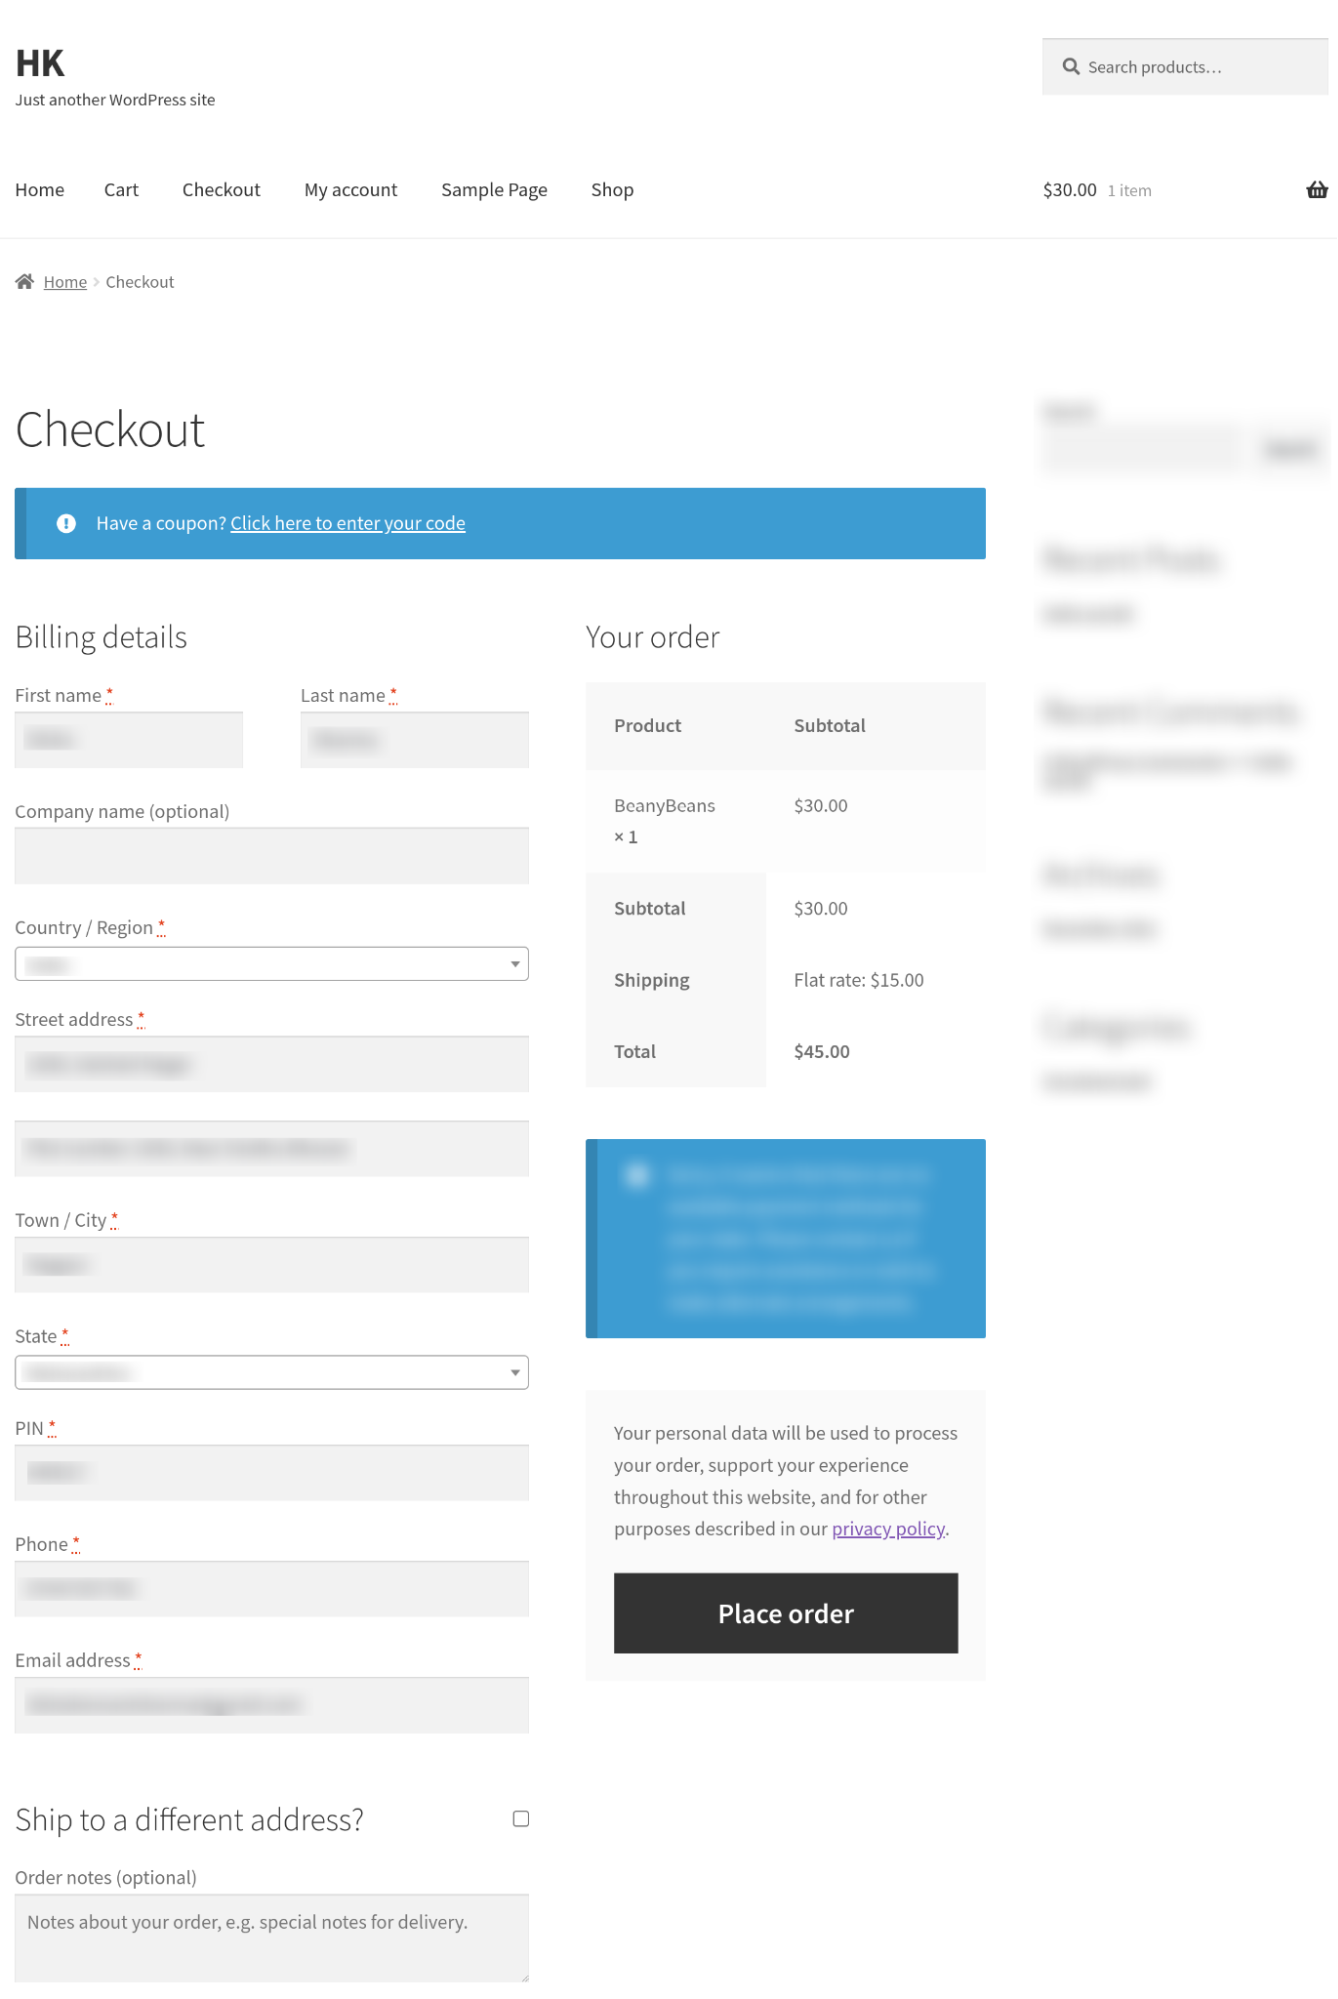 WooCommerce's default checkout page